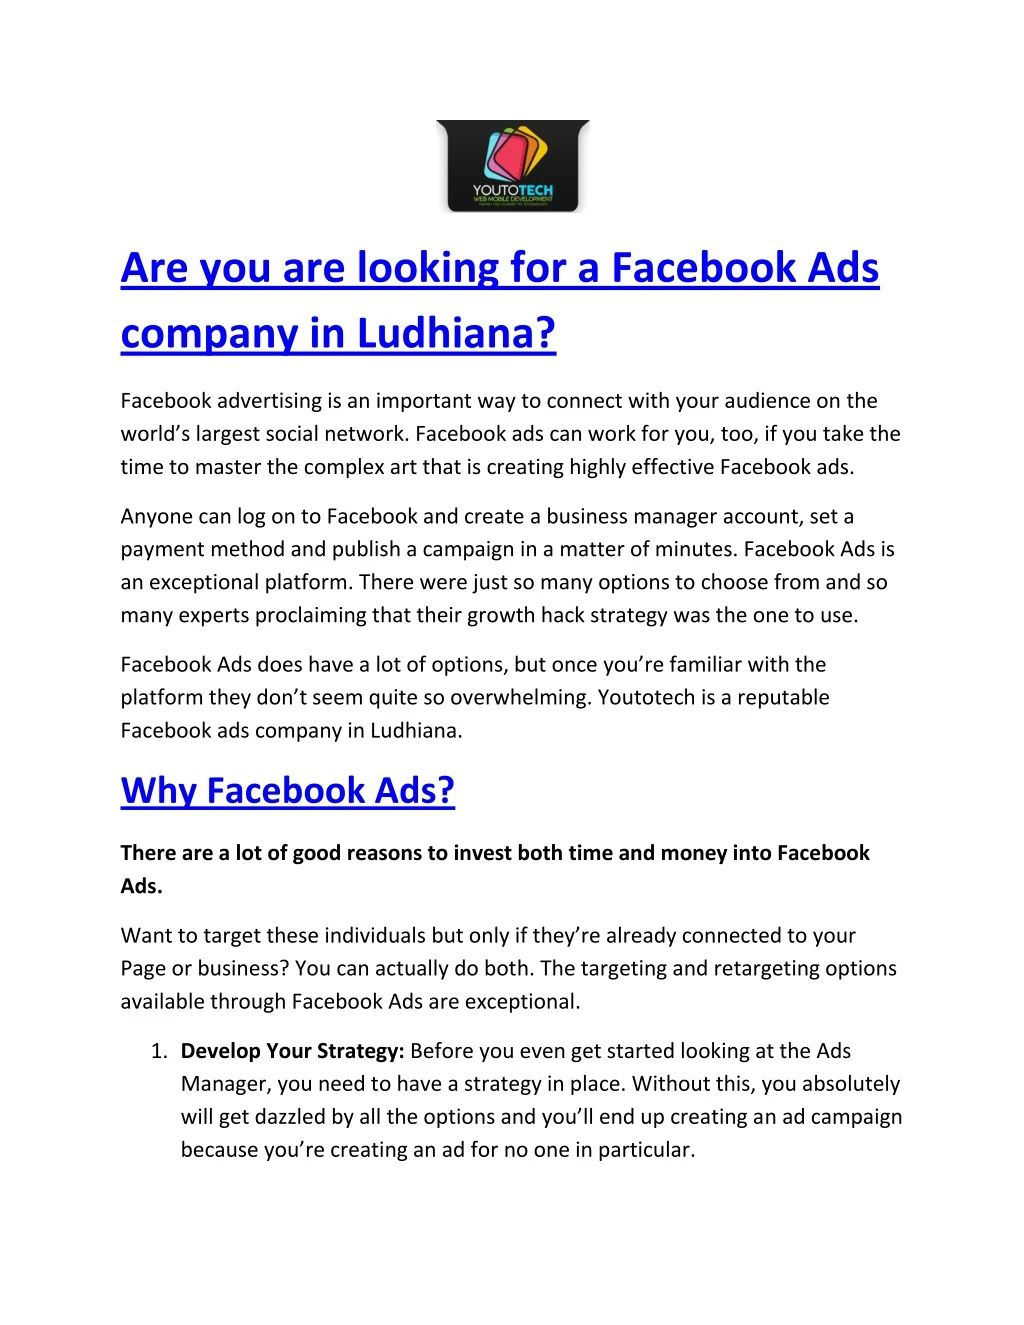 are you are looking for a facebook ads company